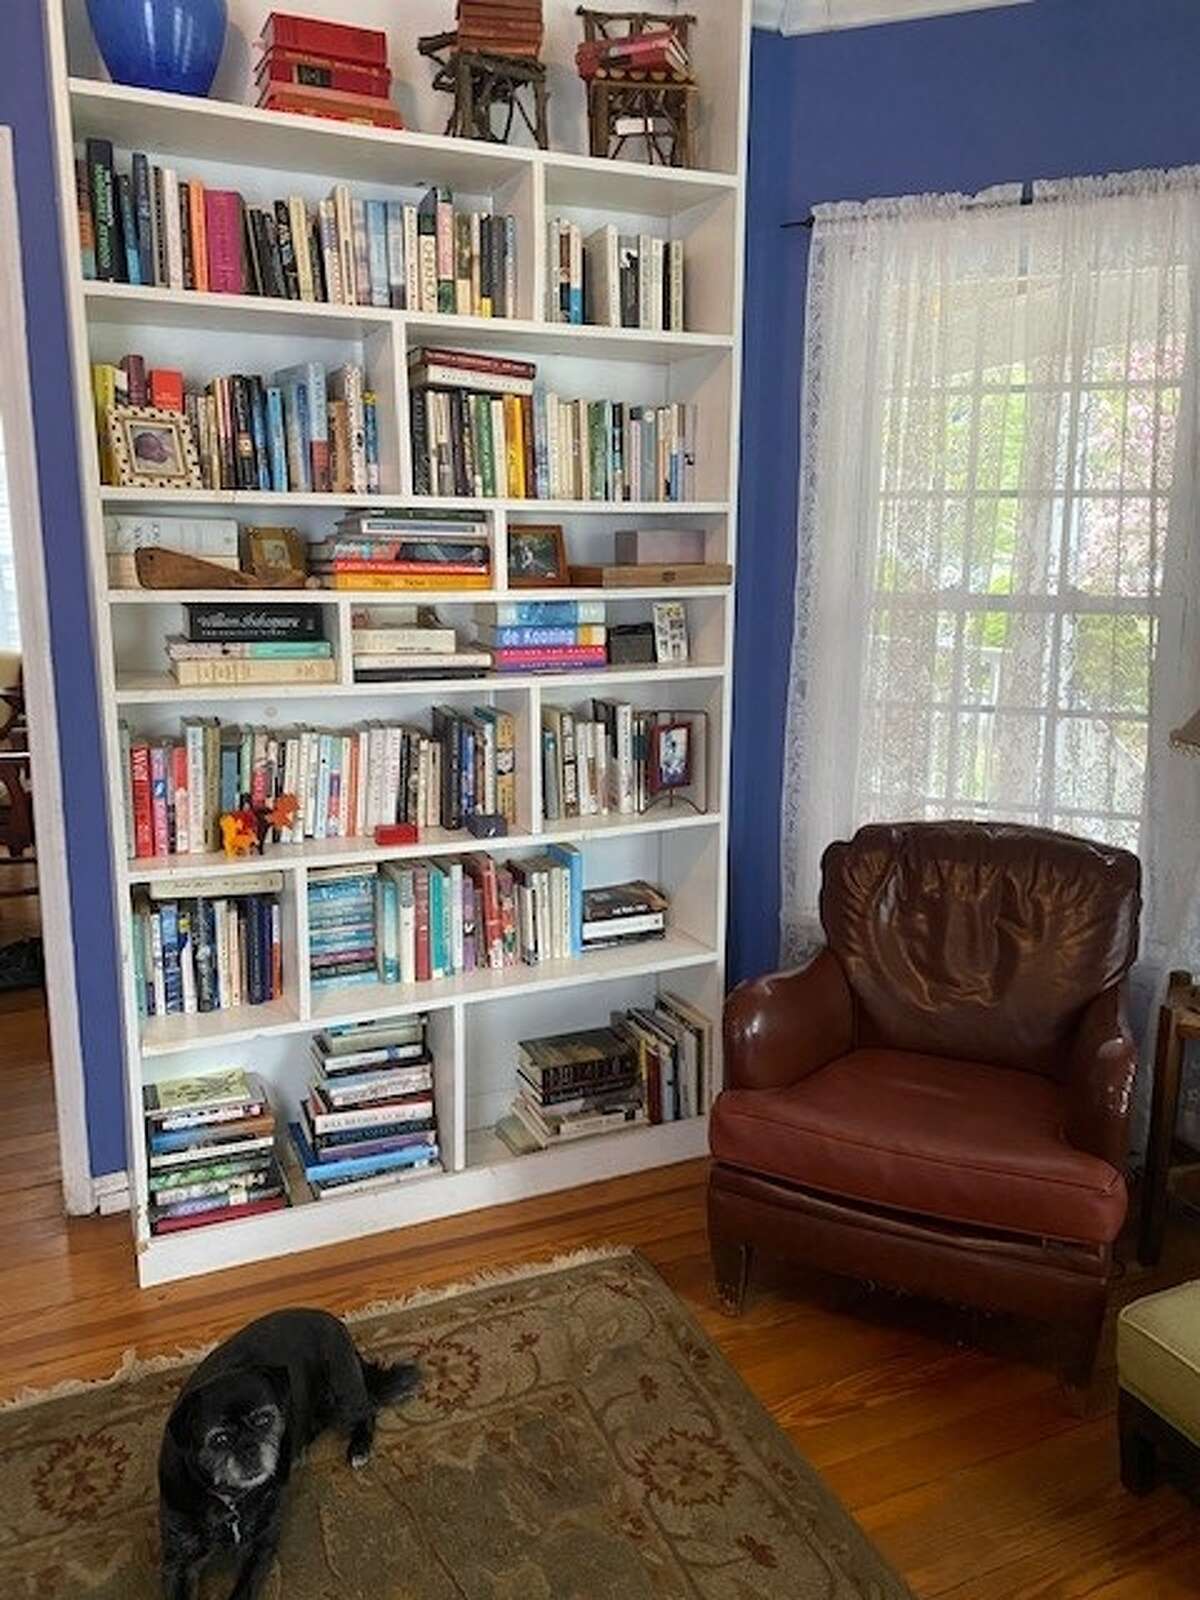 Donna Liquori's bookshelf, which recently went through a spring cleaning purge and organization, in her Delmar home.